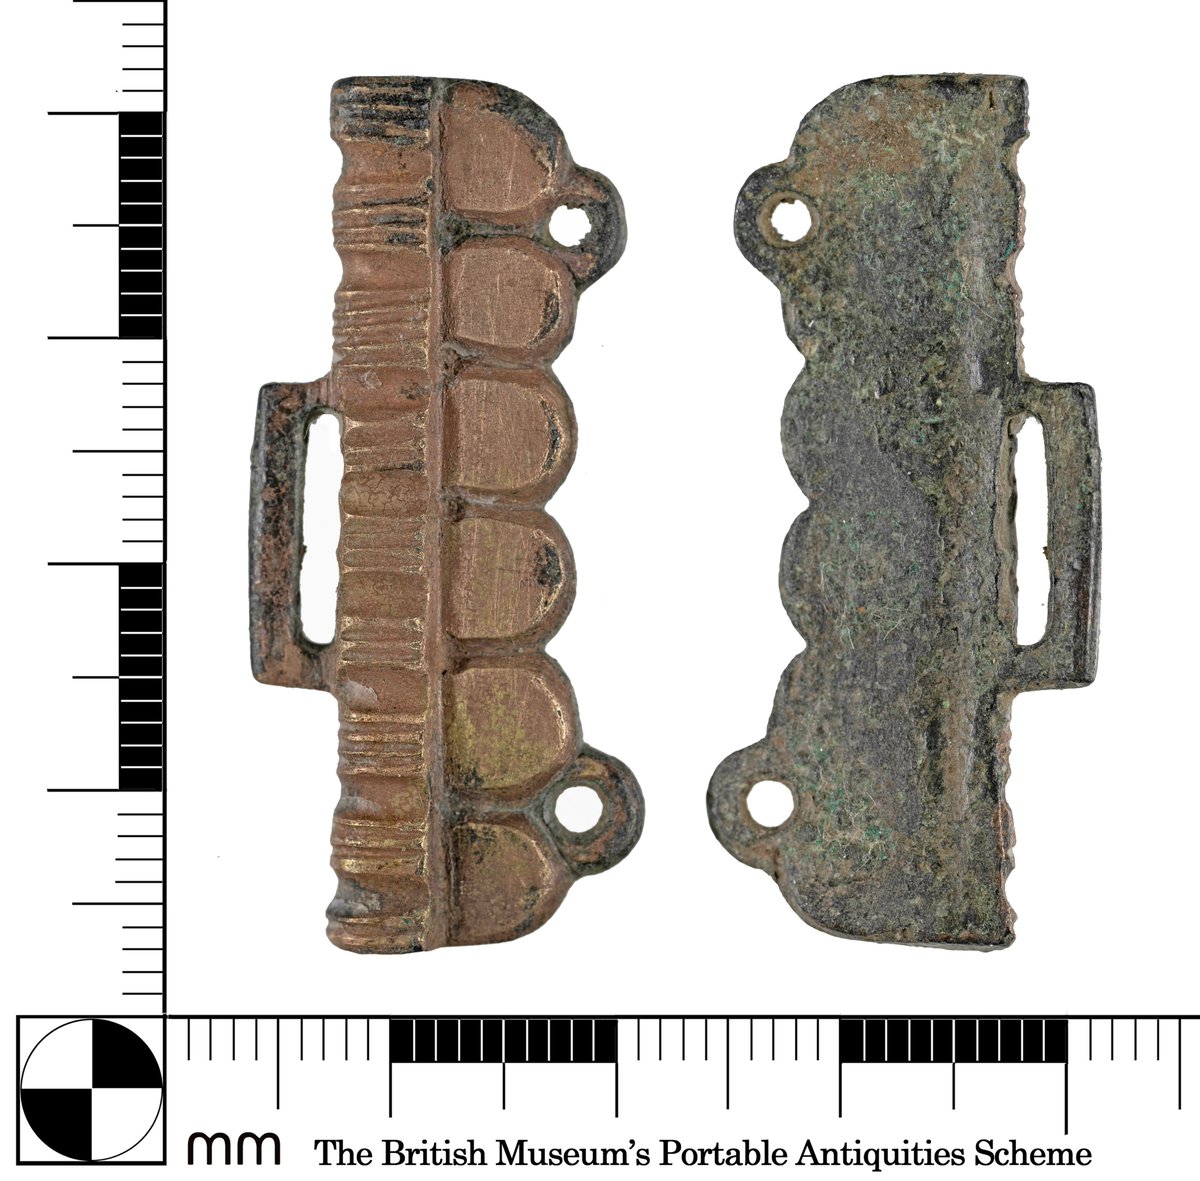 This is an Anglo-Saxon wrist clasp. These objects were used to fasten the cuffs of women’s clothing and are found almost exclusively in the Anglian culture-province of East Anglia, Cambridgeshire, the East Midlands, North and East Yorkshire.  #FindsFriday finds.org.uk/database/artef…